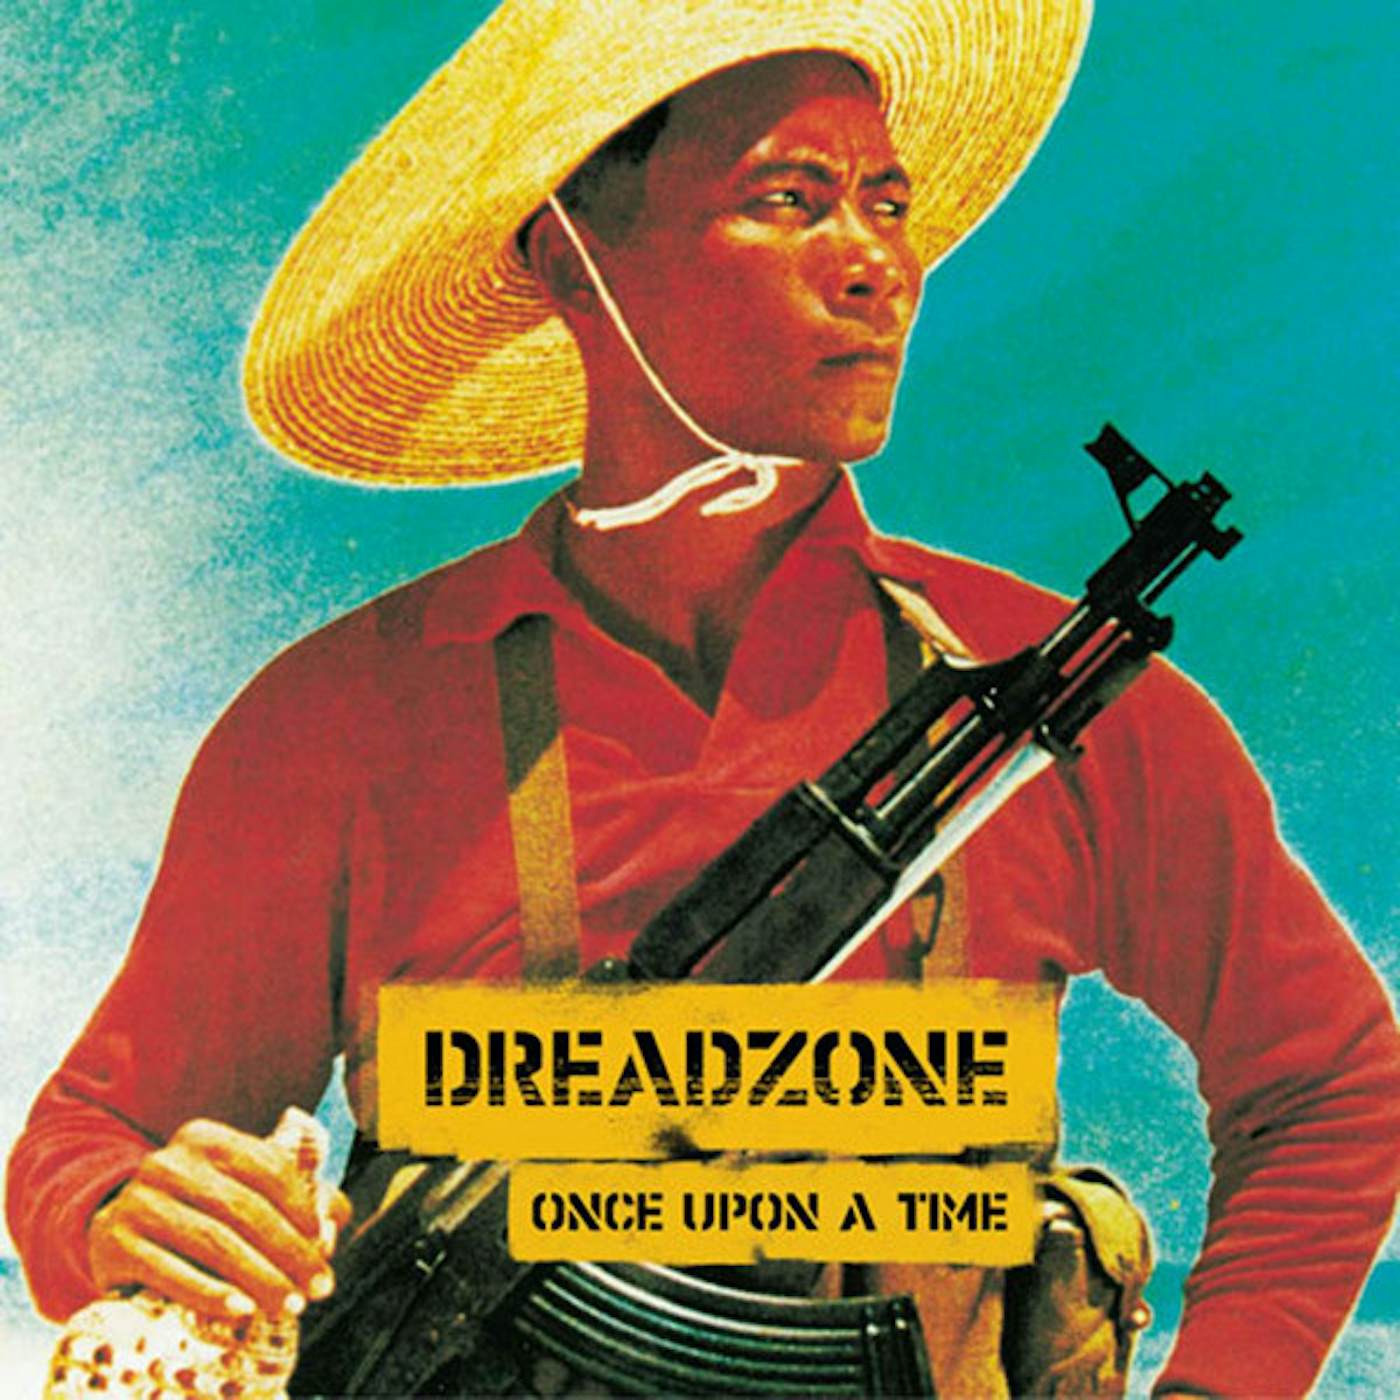 Dreadzone Once Upon A Time Vinyl Record